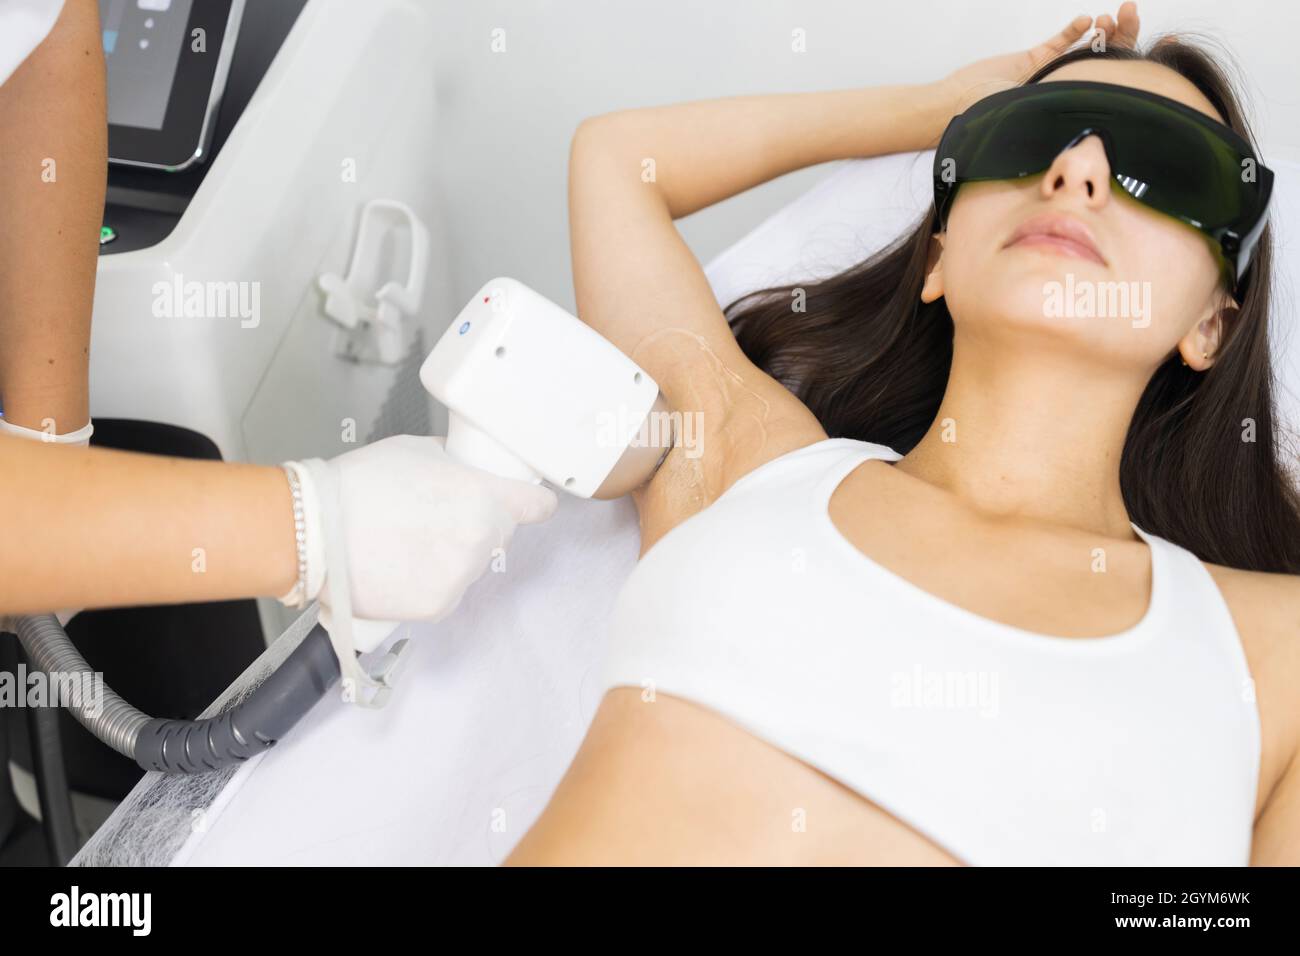 Laser Hair Removal For One Year Depilex Aesthetics Groupon